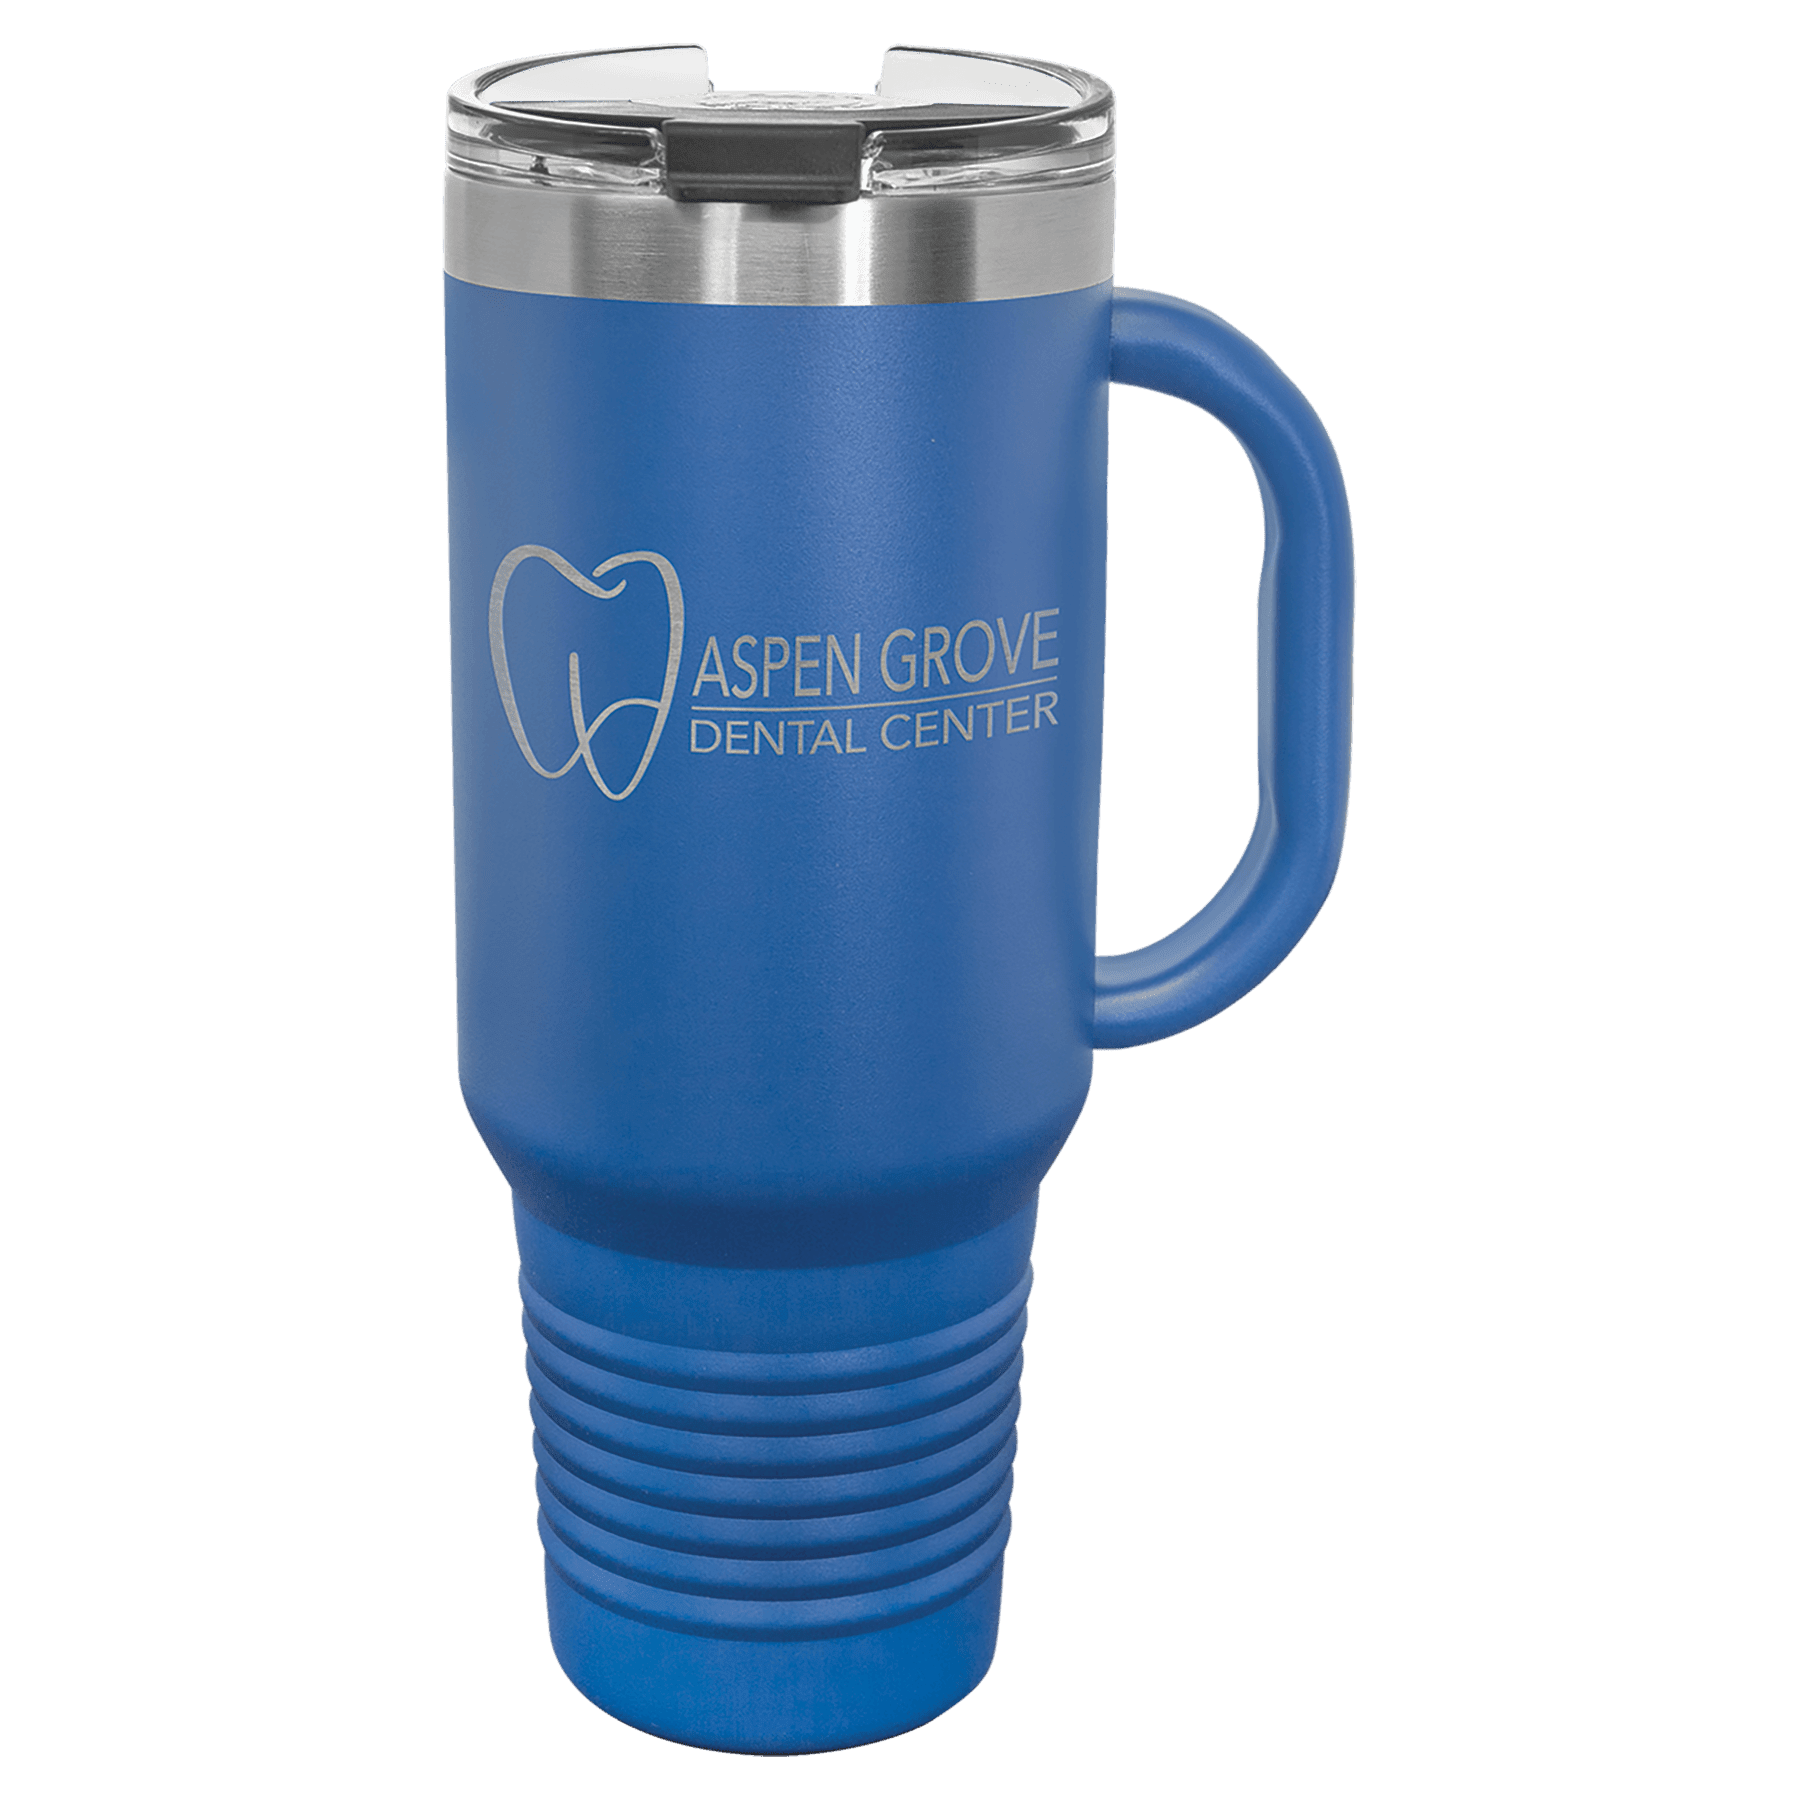 Laserable travel mug with handle stainlessThe Trophy Trolley